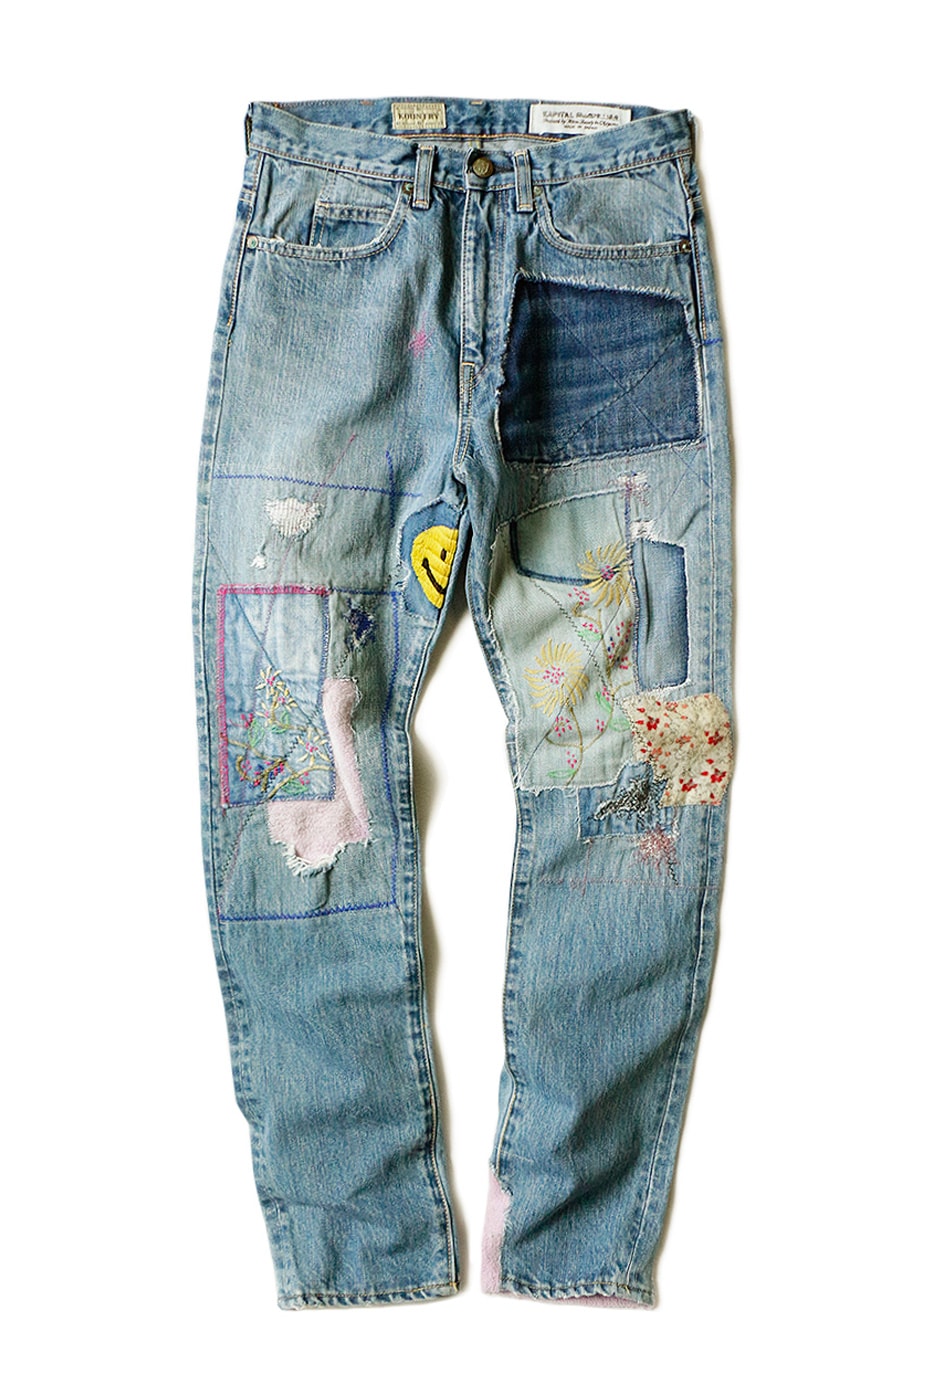 KAPITAL 14oz OKABILLY Gypsy Patch Remake Denim Release Japanese fashion menswear streetwear patchwork cotton jeans pants trousers smiley flower embroidery washed 